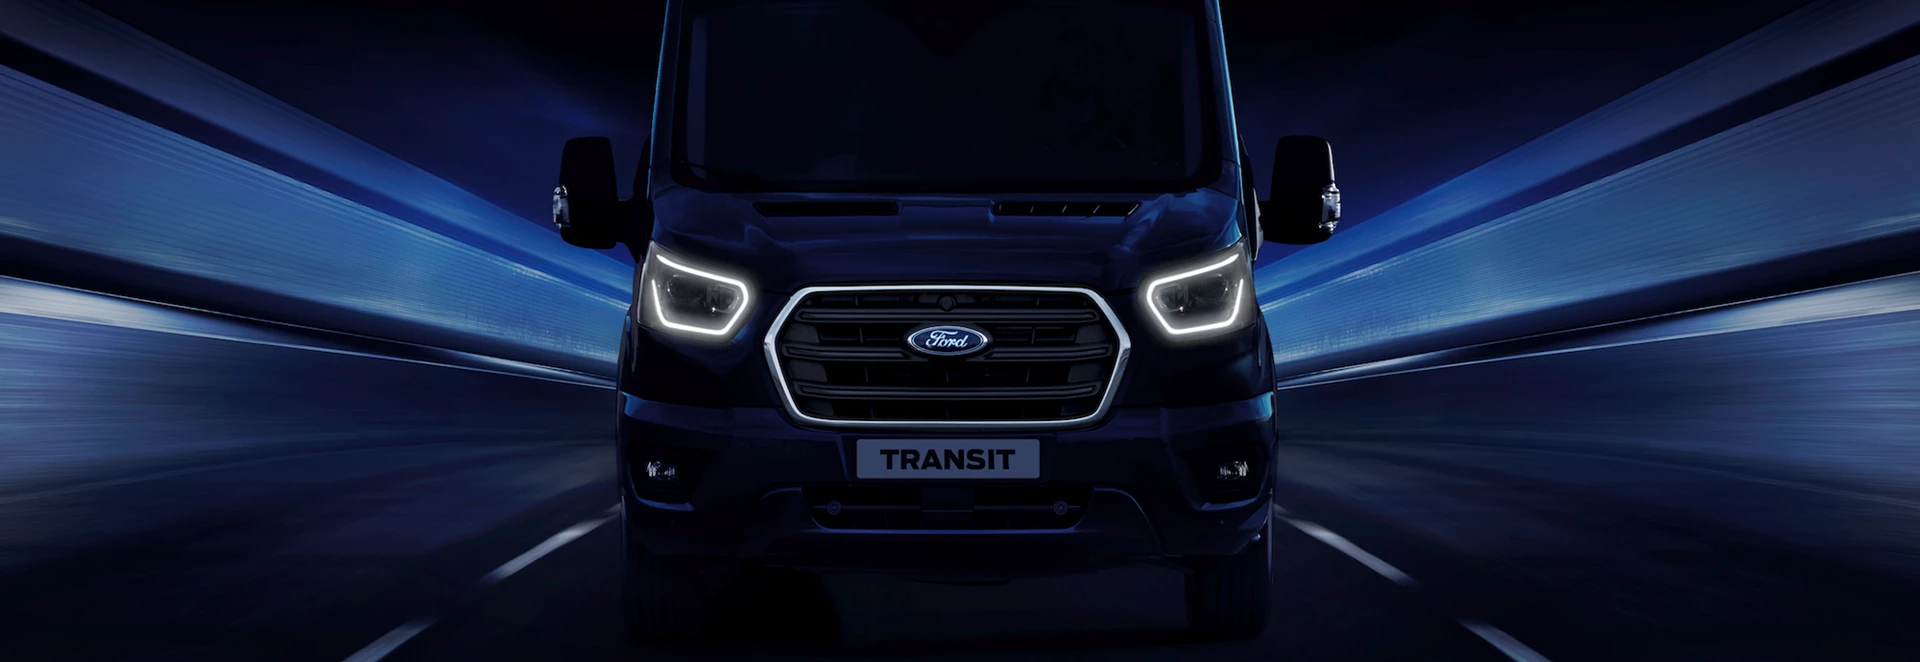 Ford to reveal electrified Transit models this month